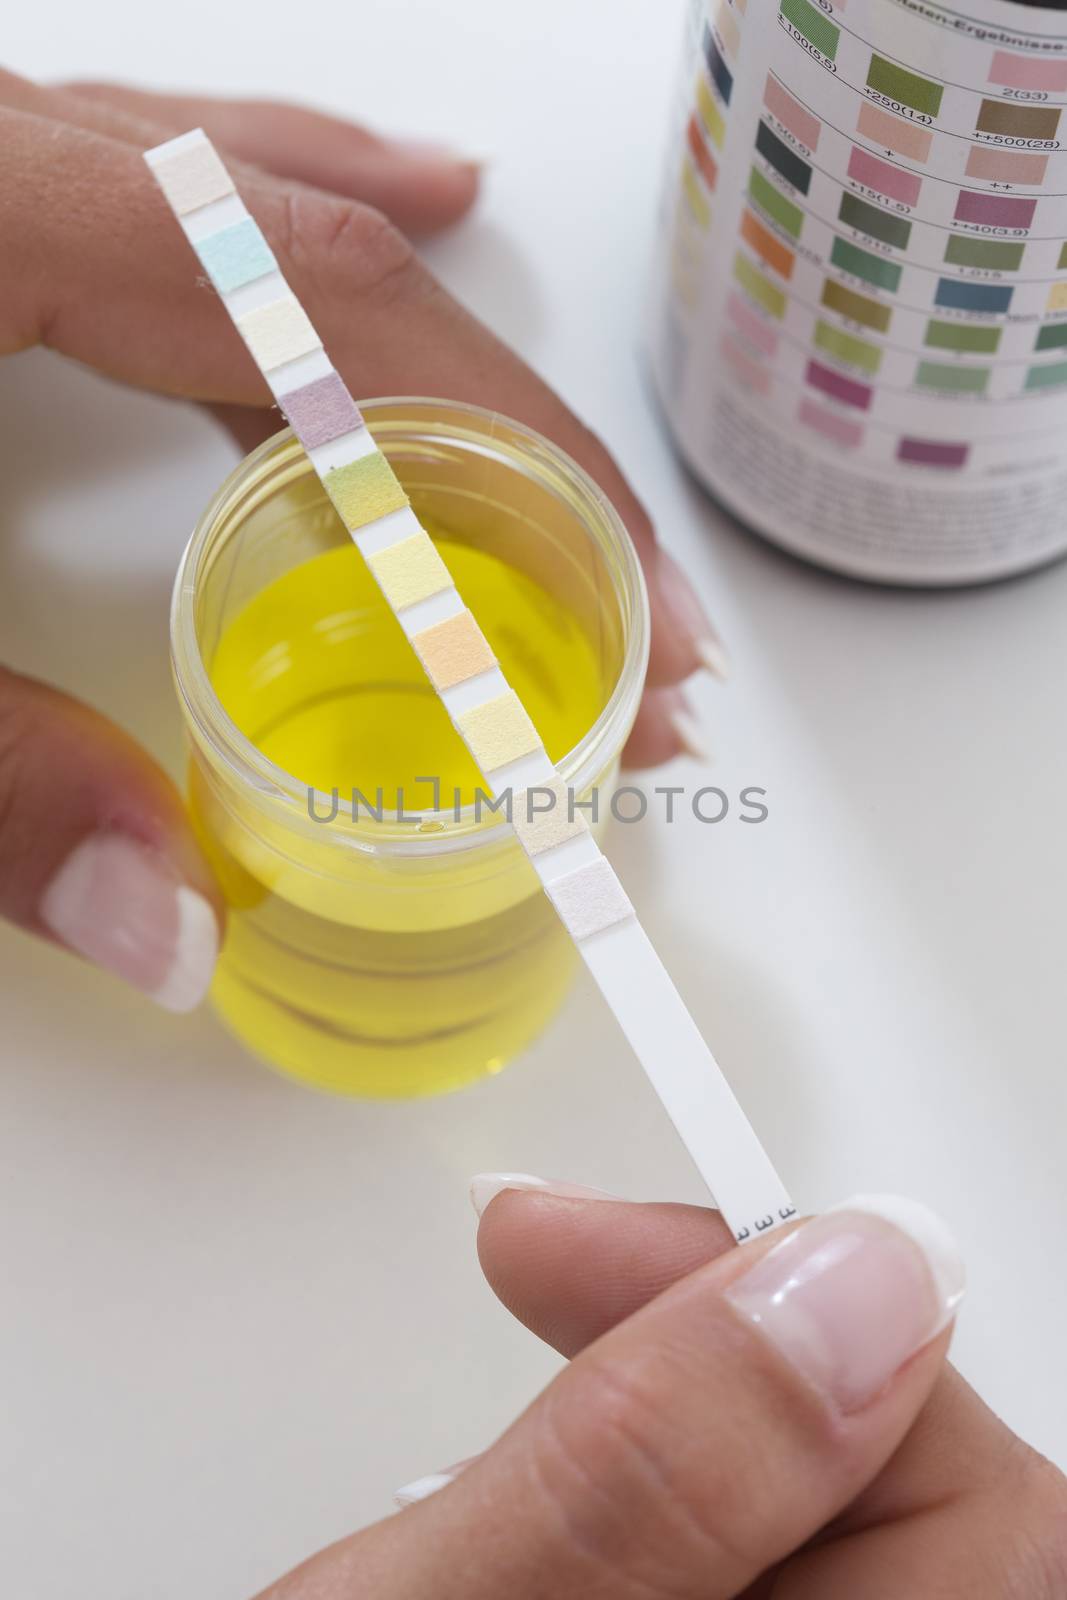 Urine test stripes examined by a young woman at home by JPC-PROD